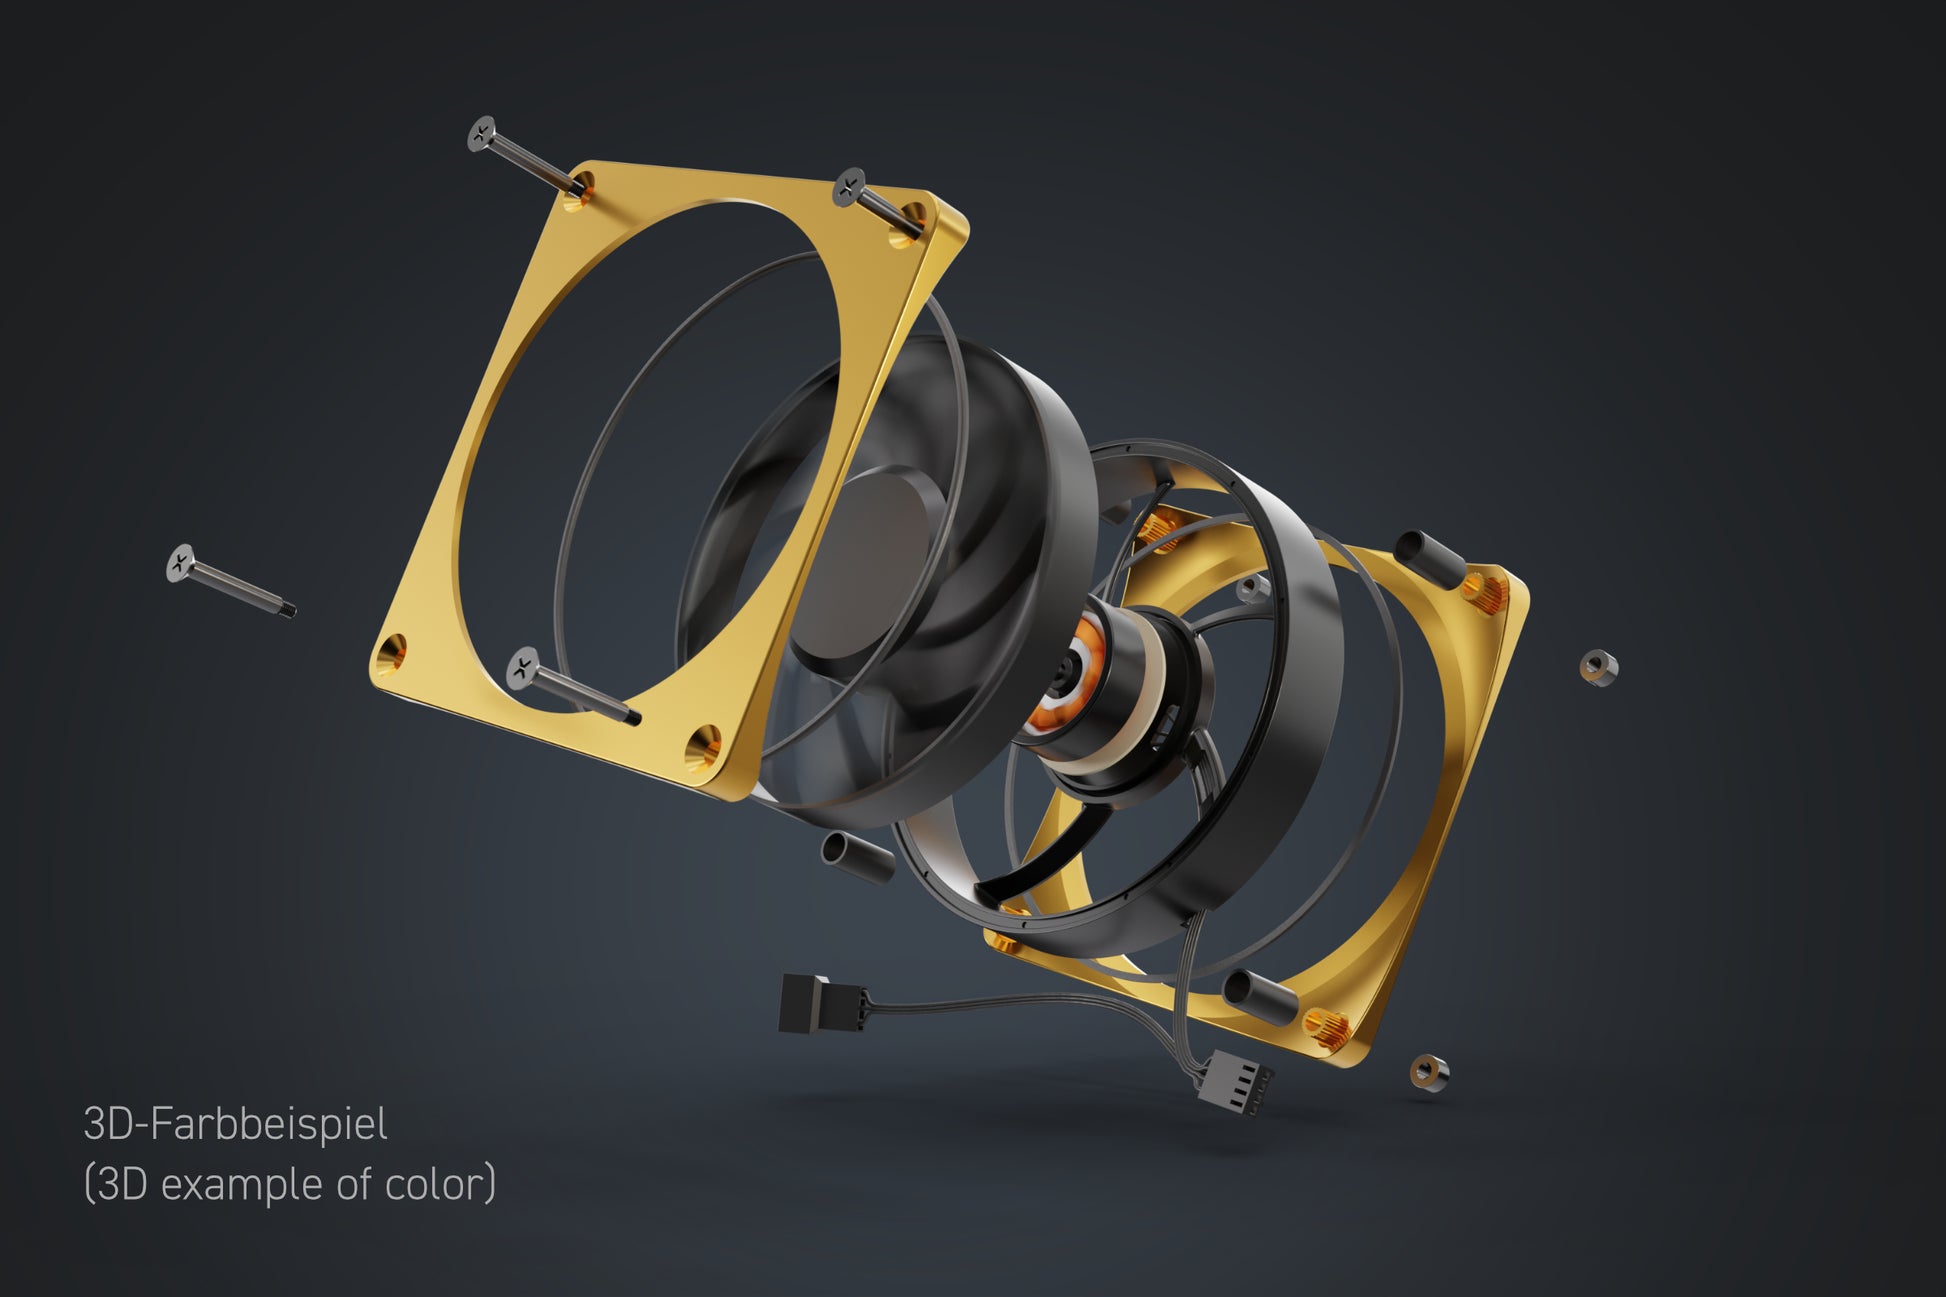 Alphacool Apex Stealth 120mm Power Metal Fan - Gold - Ordinary Cooling Gear